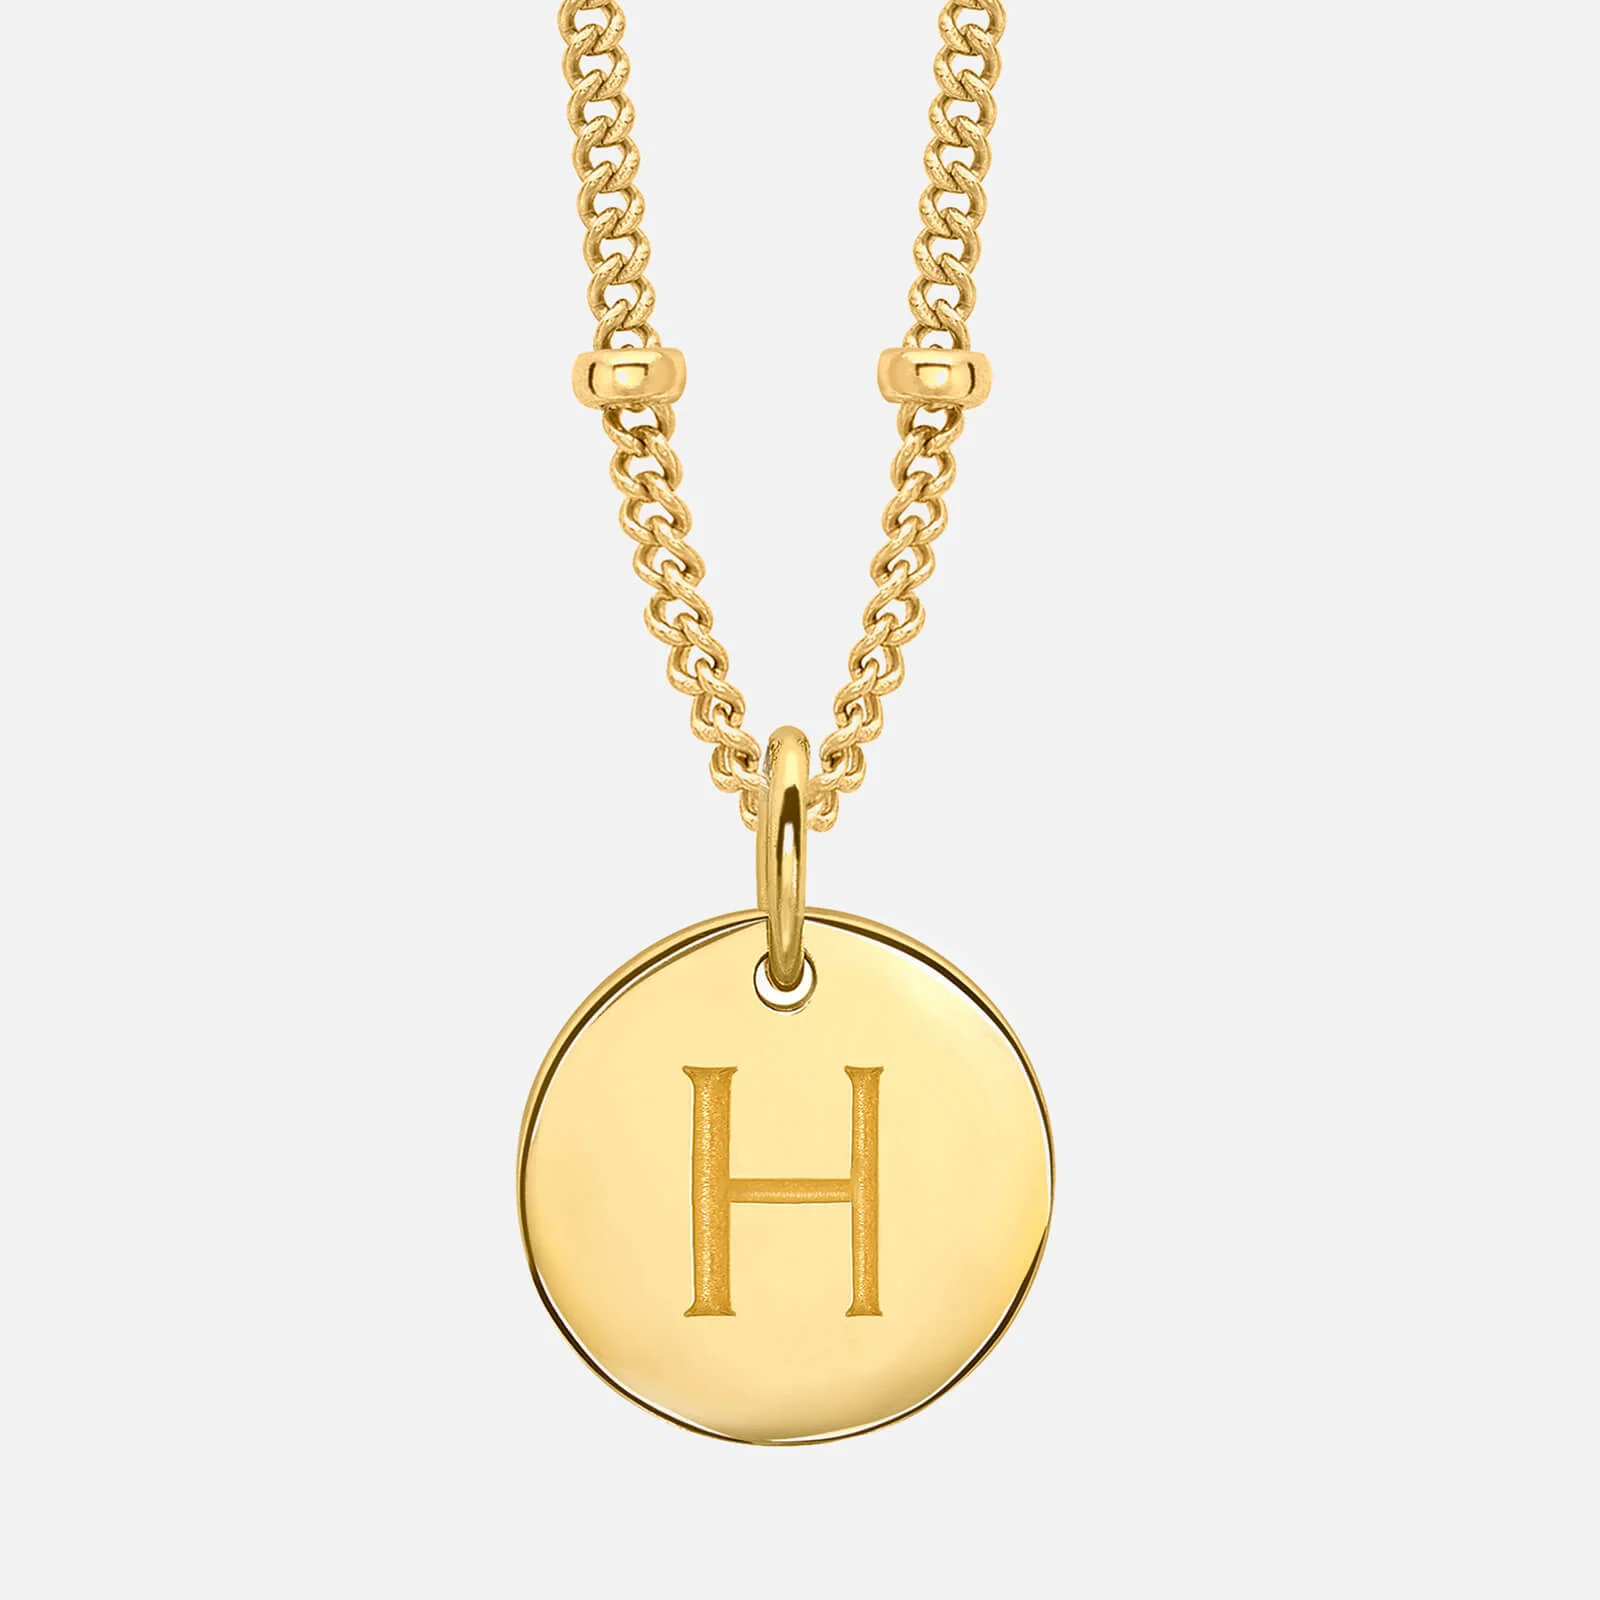 Missoma Women's Gold 'H' Initial Necklace - Gold Image 1